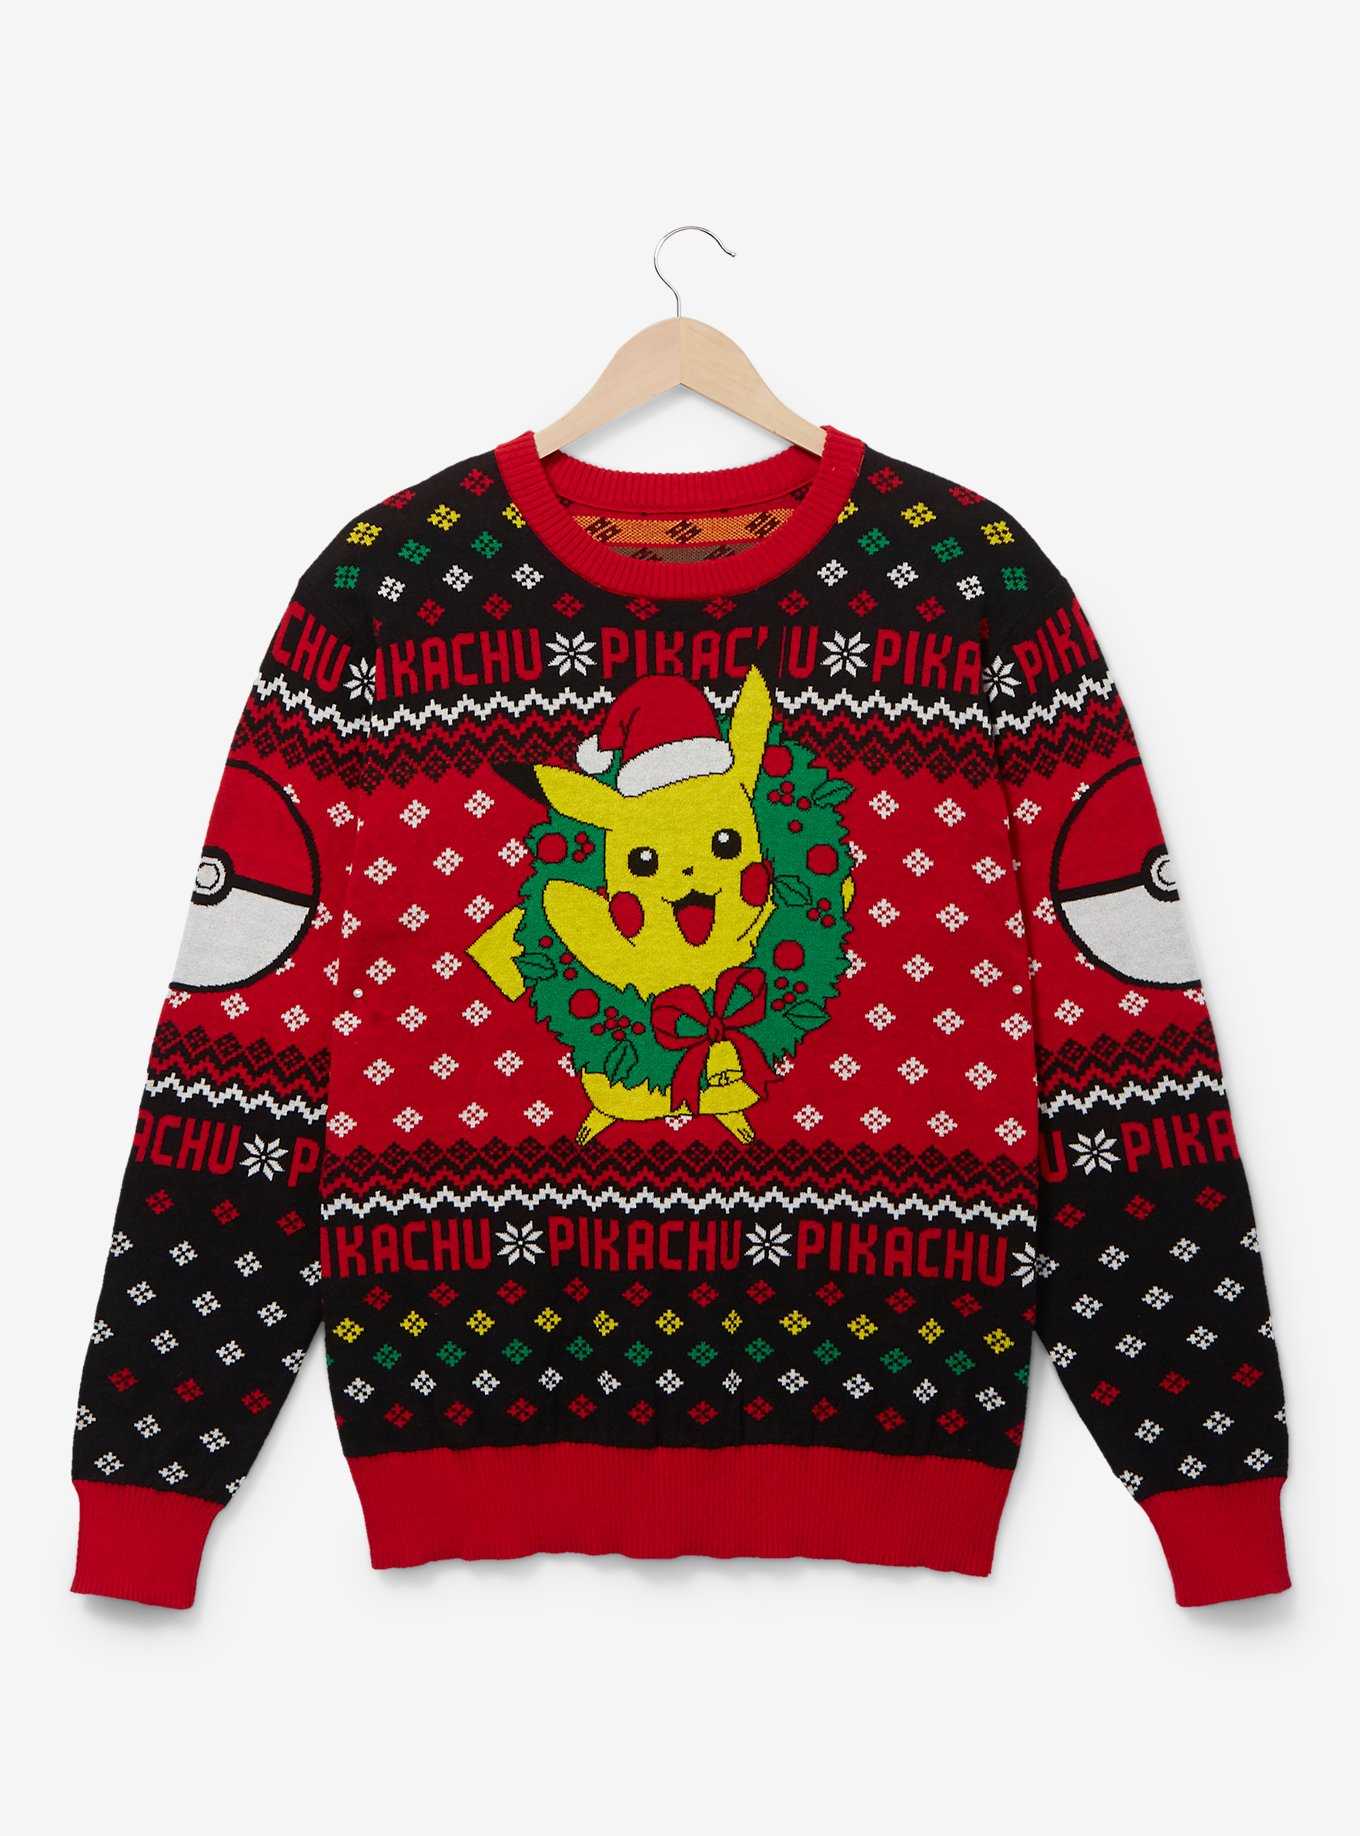 Pokémon Pikachu Wreath Holiday Sweater - BoxLunch Exclusive, , hi-res